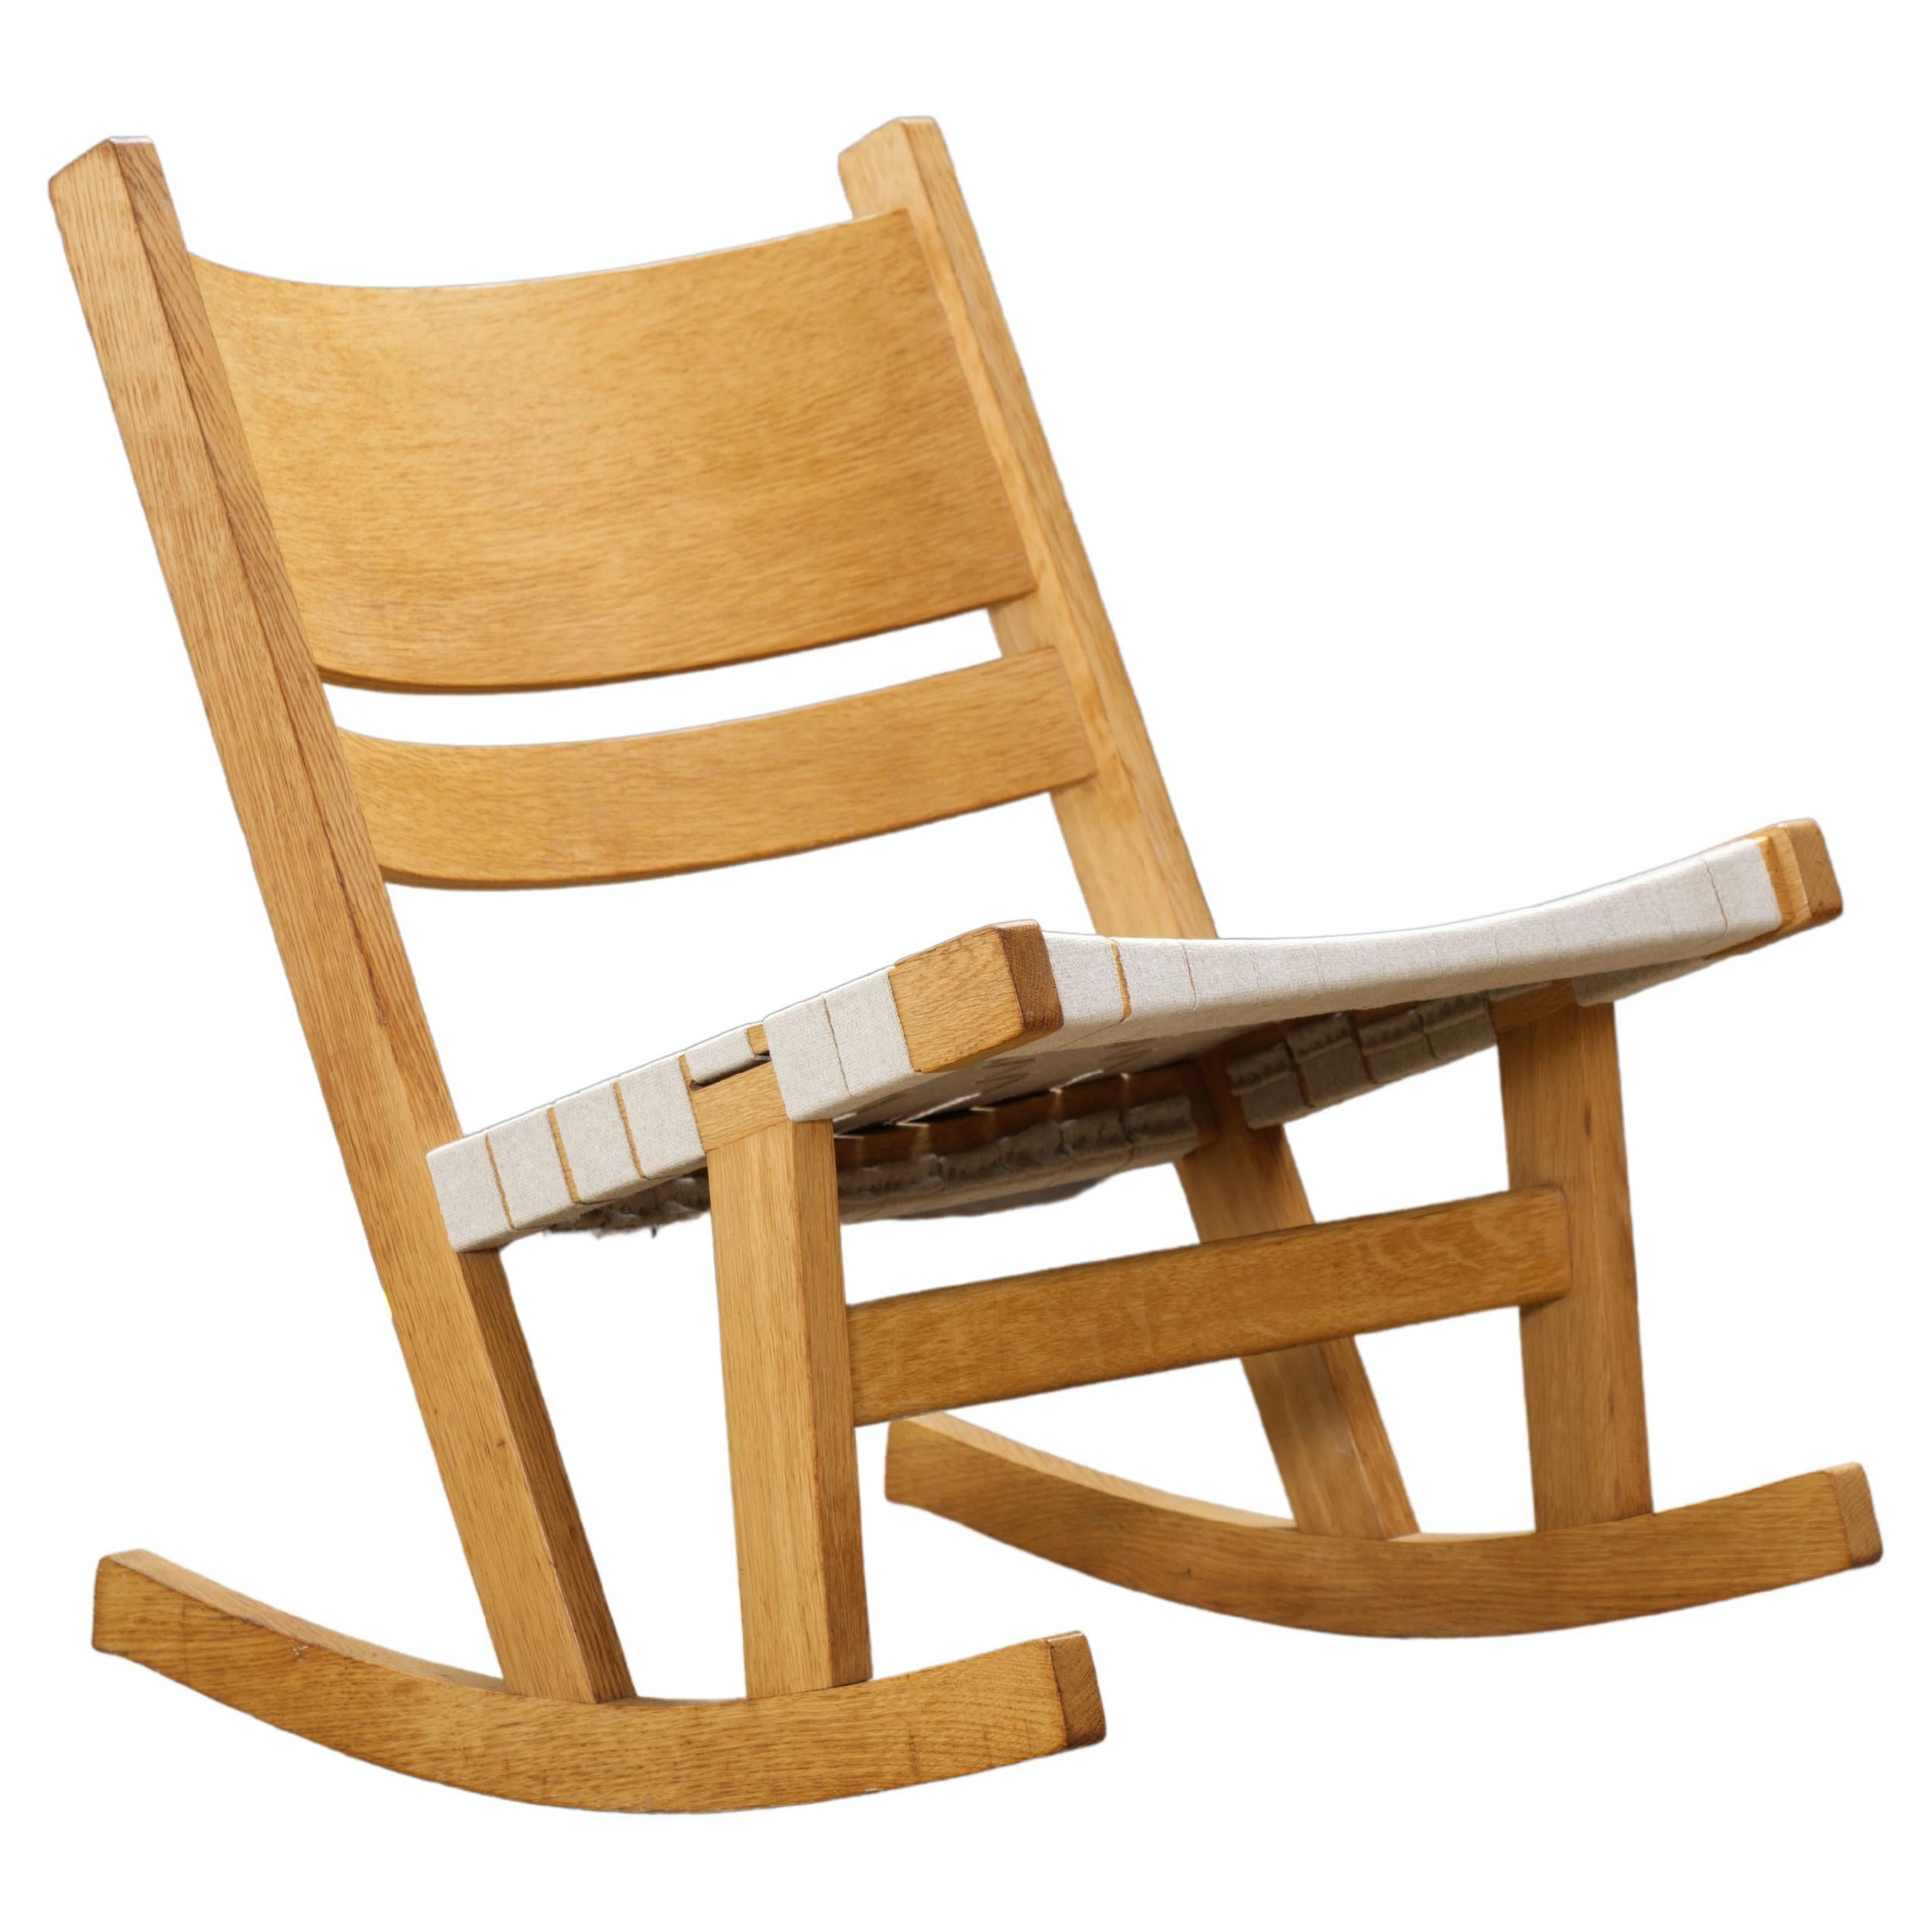 How old is the rocking chair?